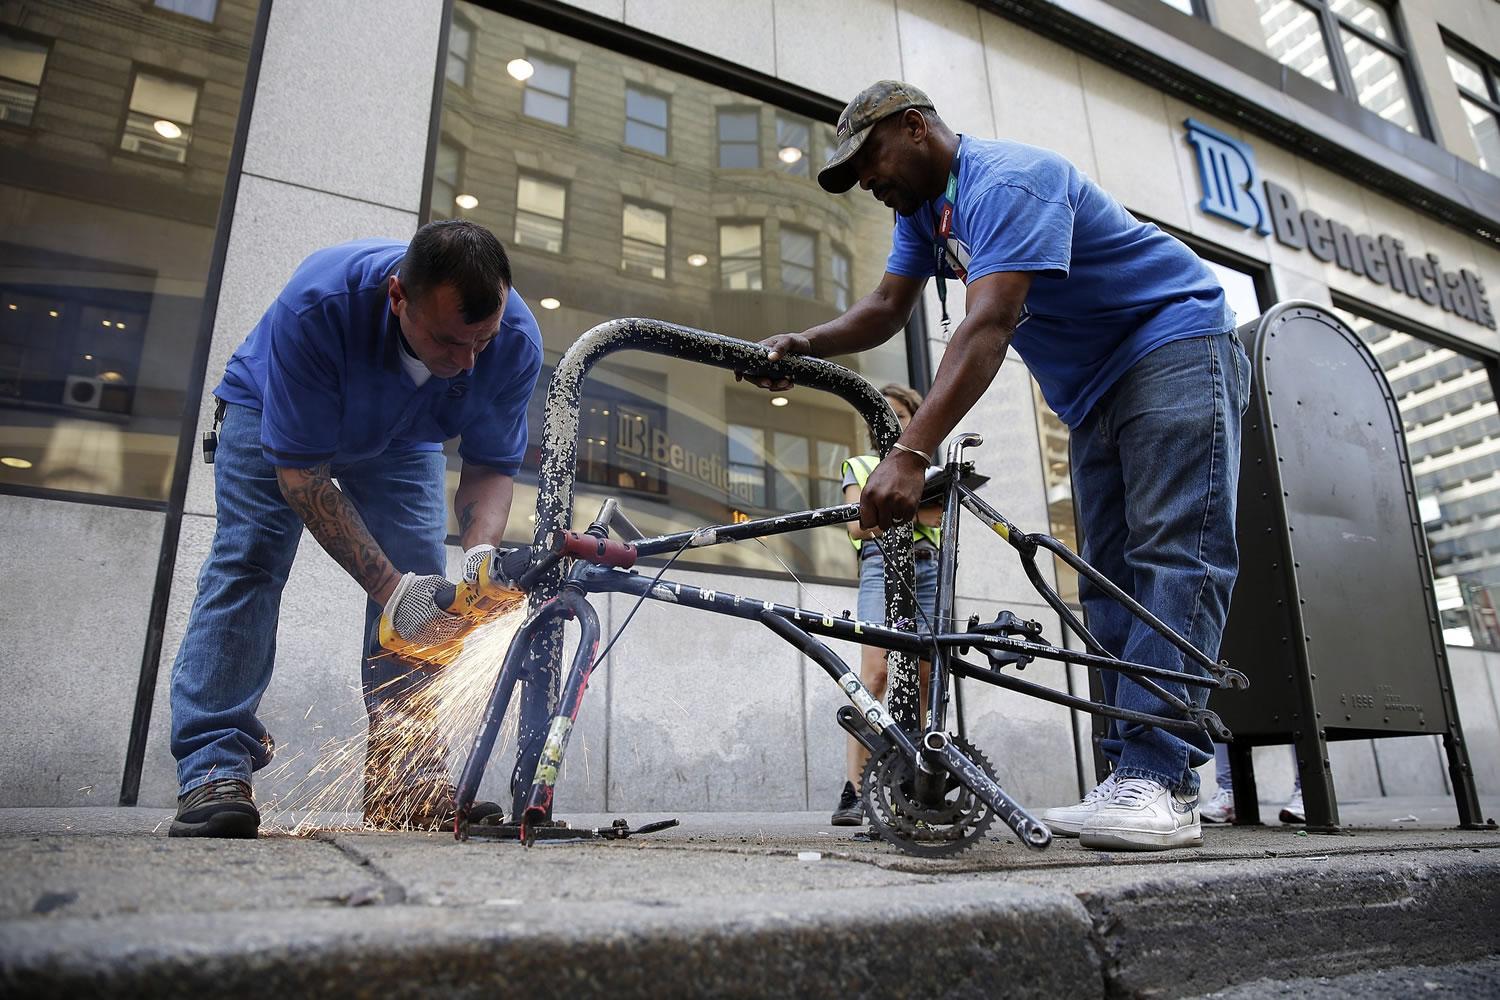 City workers remove an abandoned bike from a rack Thursday in Philadelphia.